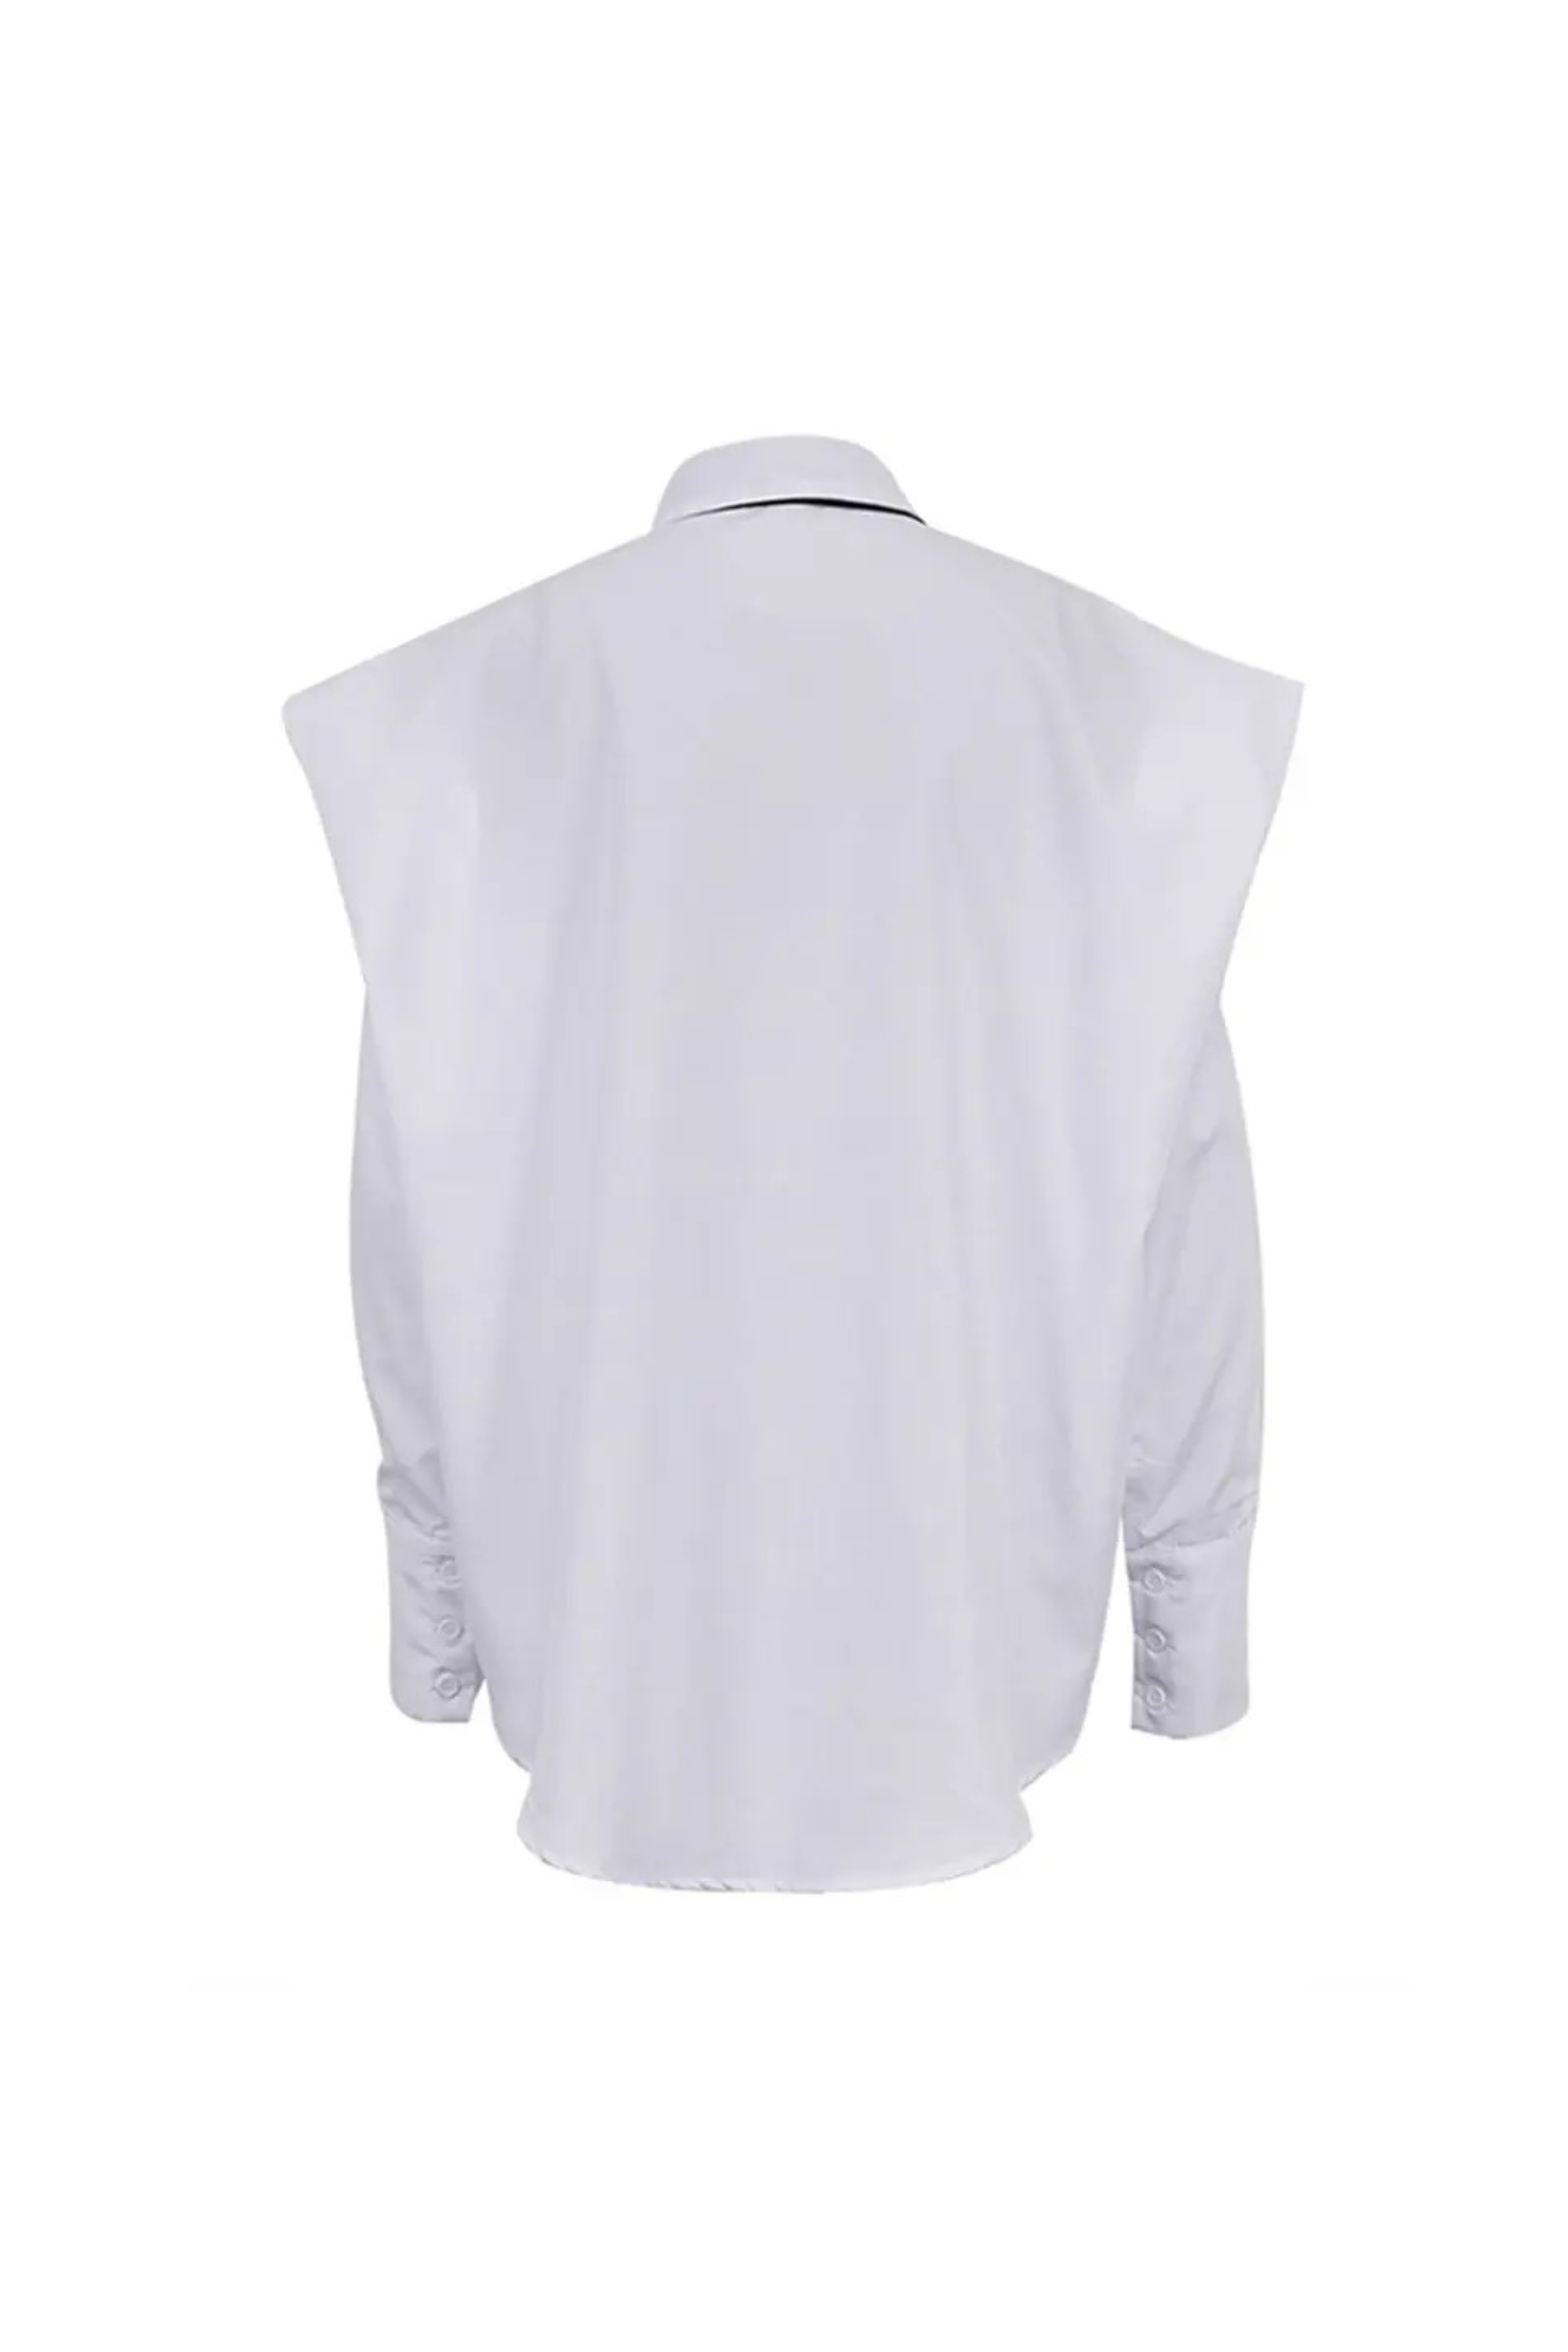 GOLDxTEAL white oversized shirt with black tie.